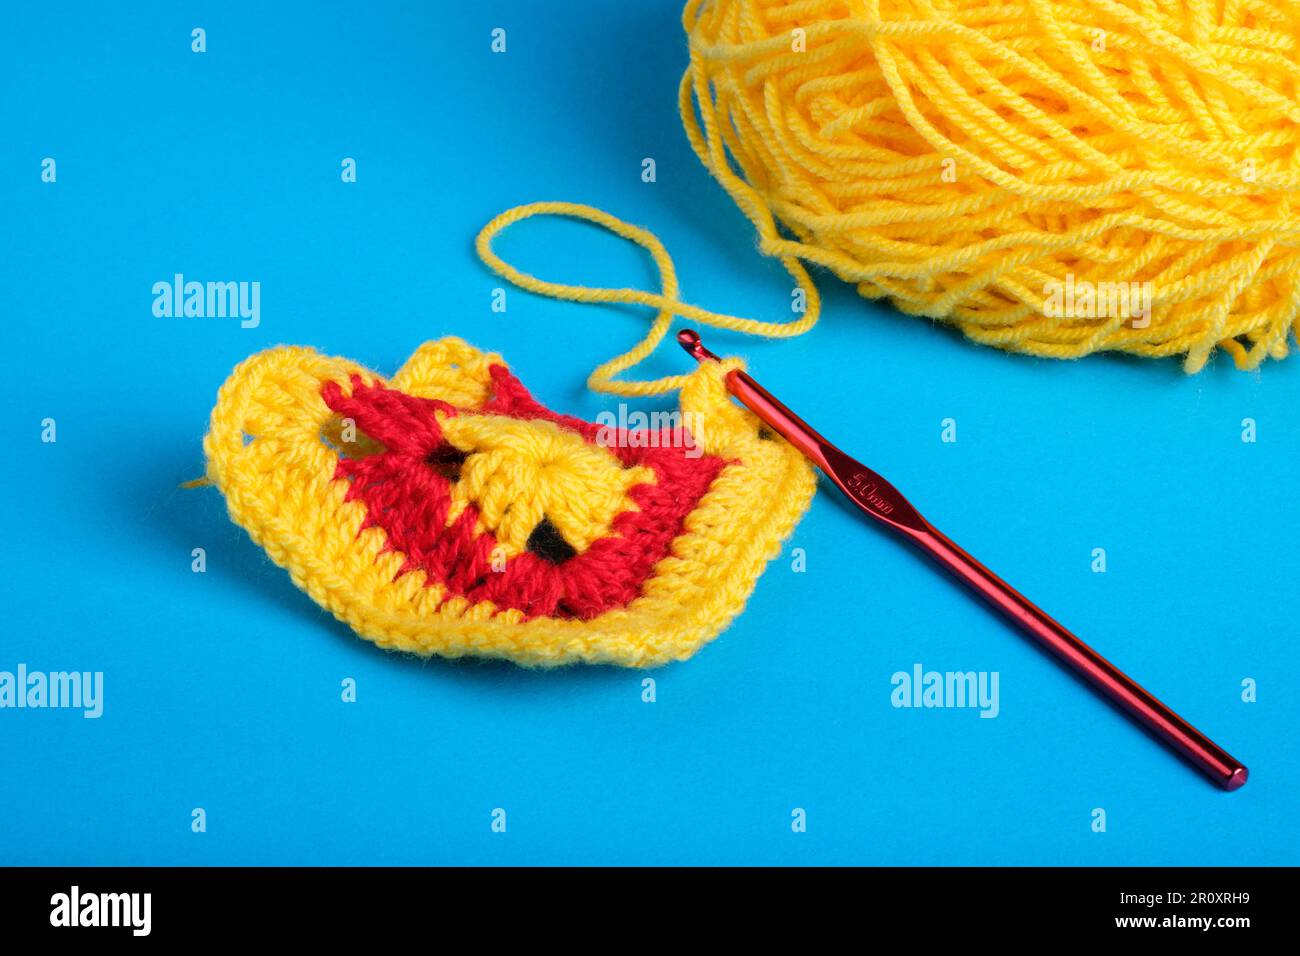 Crochet Granny Square in Yellow and Red with Yellow ball of Yarn and Dark Red Crochet Hook on a Kingfisher blue background. Stock Photo